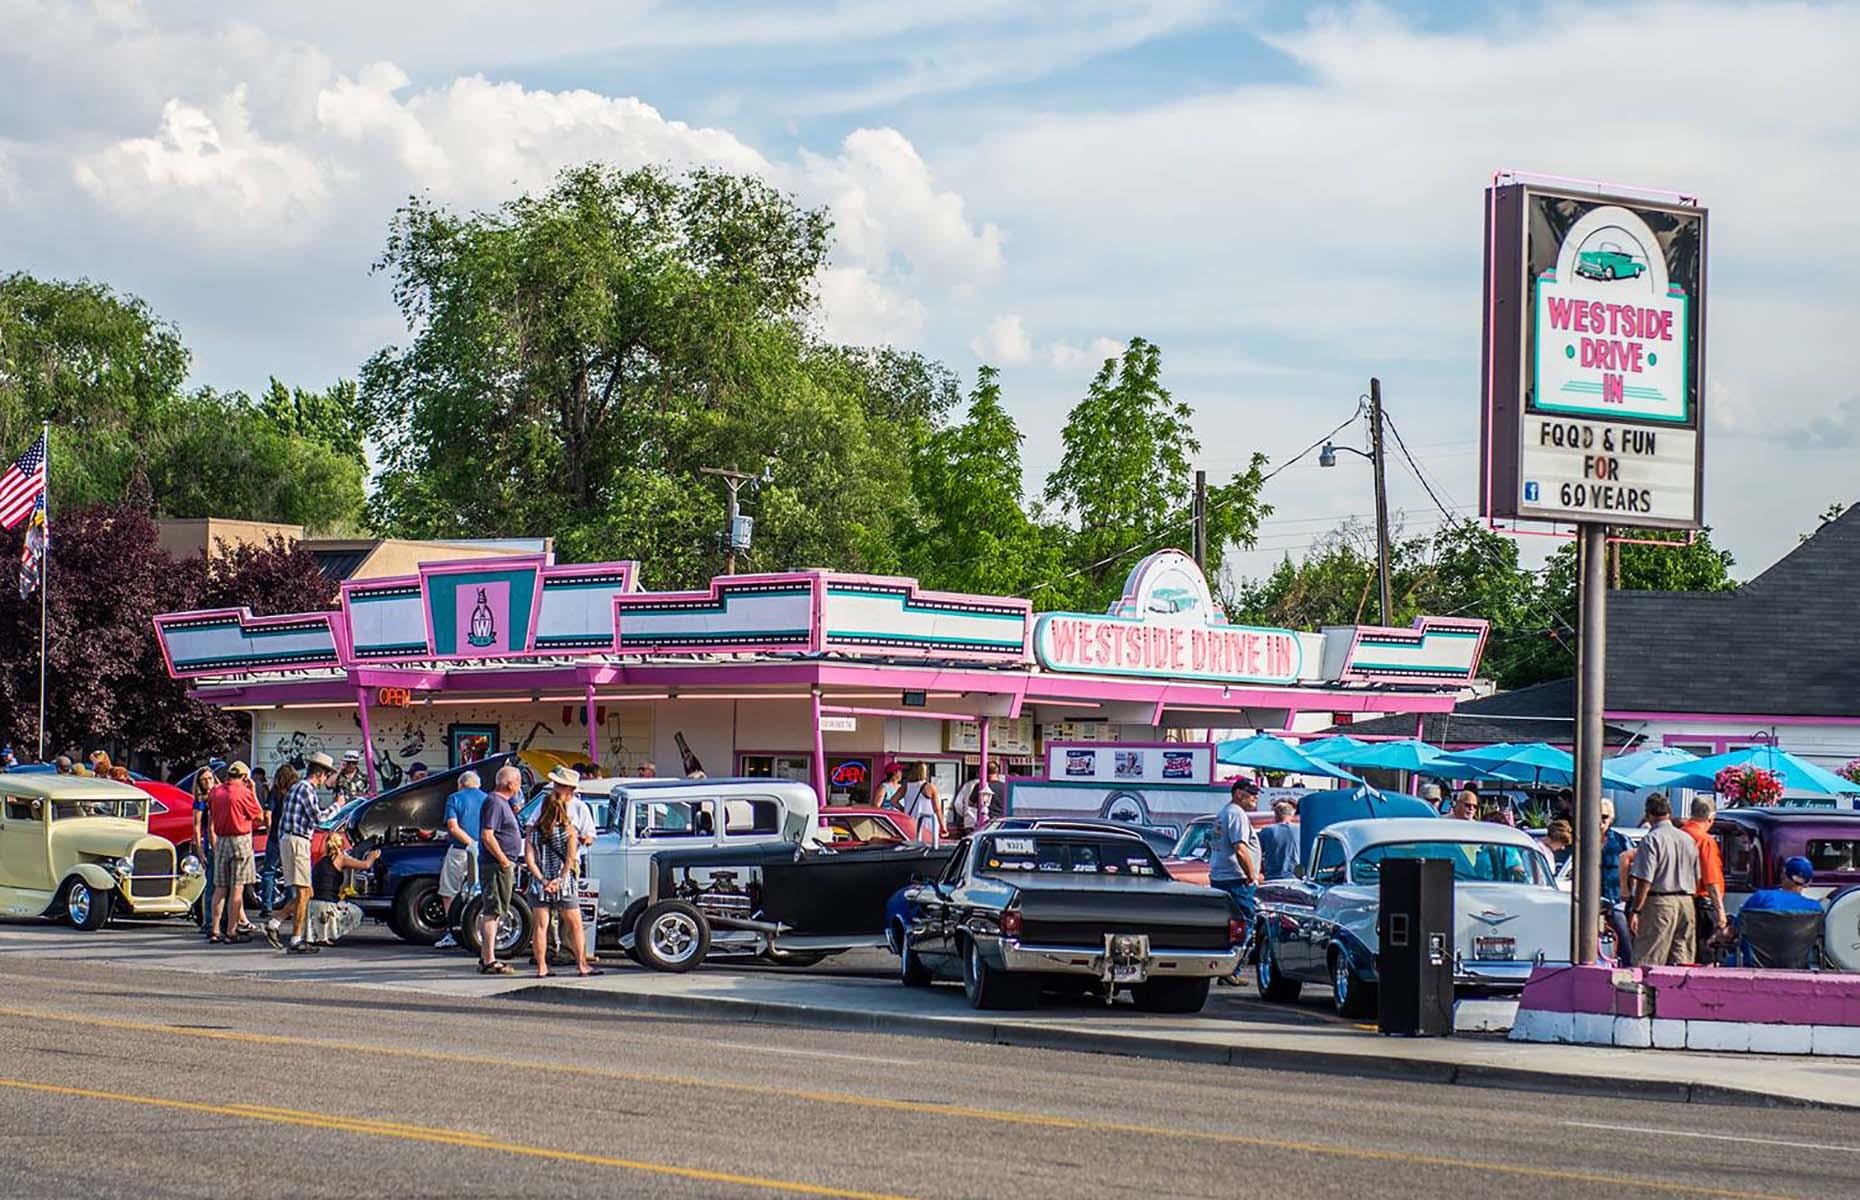 <p>If you’re passing through Boise, Westside Drive In is a must-visit. At what other pink and turquoise 1950s drive-in can you get prime rib, a full rack of pork ribs or its signature dish the <a href="https://westsidedrivein.com/files/2019/07/Westside_Drive-In_Menu.pdf">Idaho ice cream potato</a> (ice cream shaped like a potato)? It has two charming outposts, one on West State Street and one on Parkcenter Boulevard.</p>